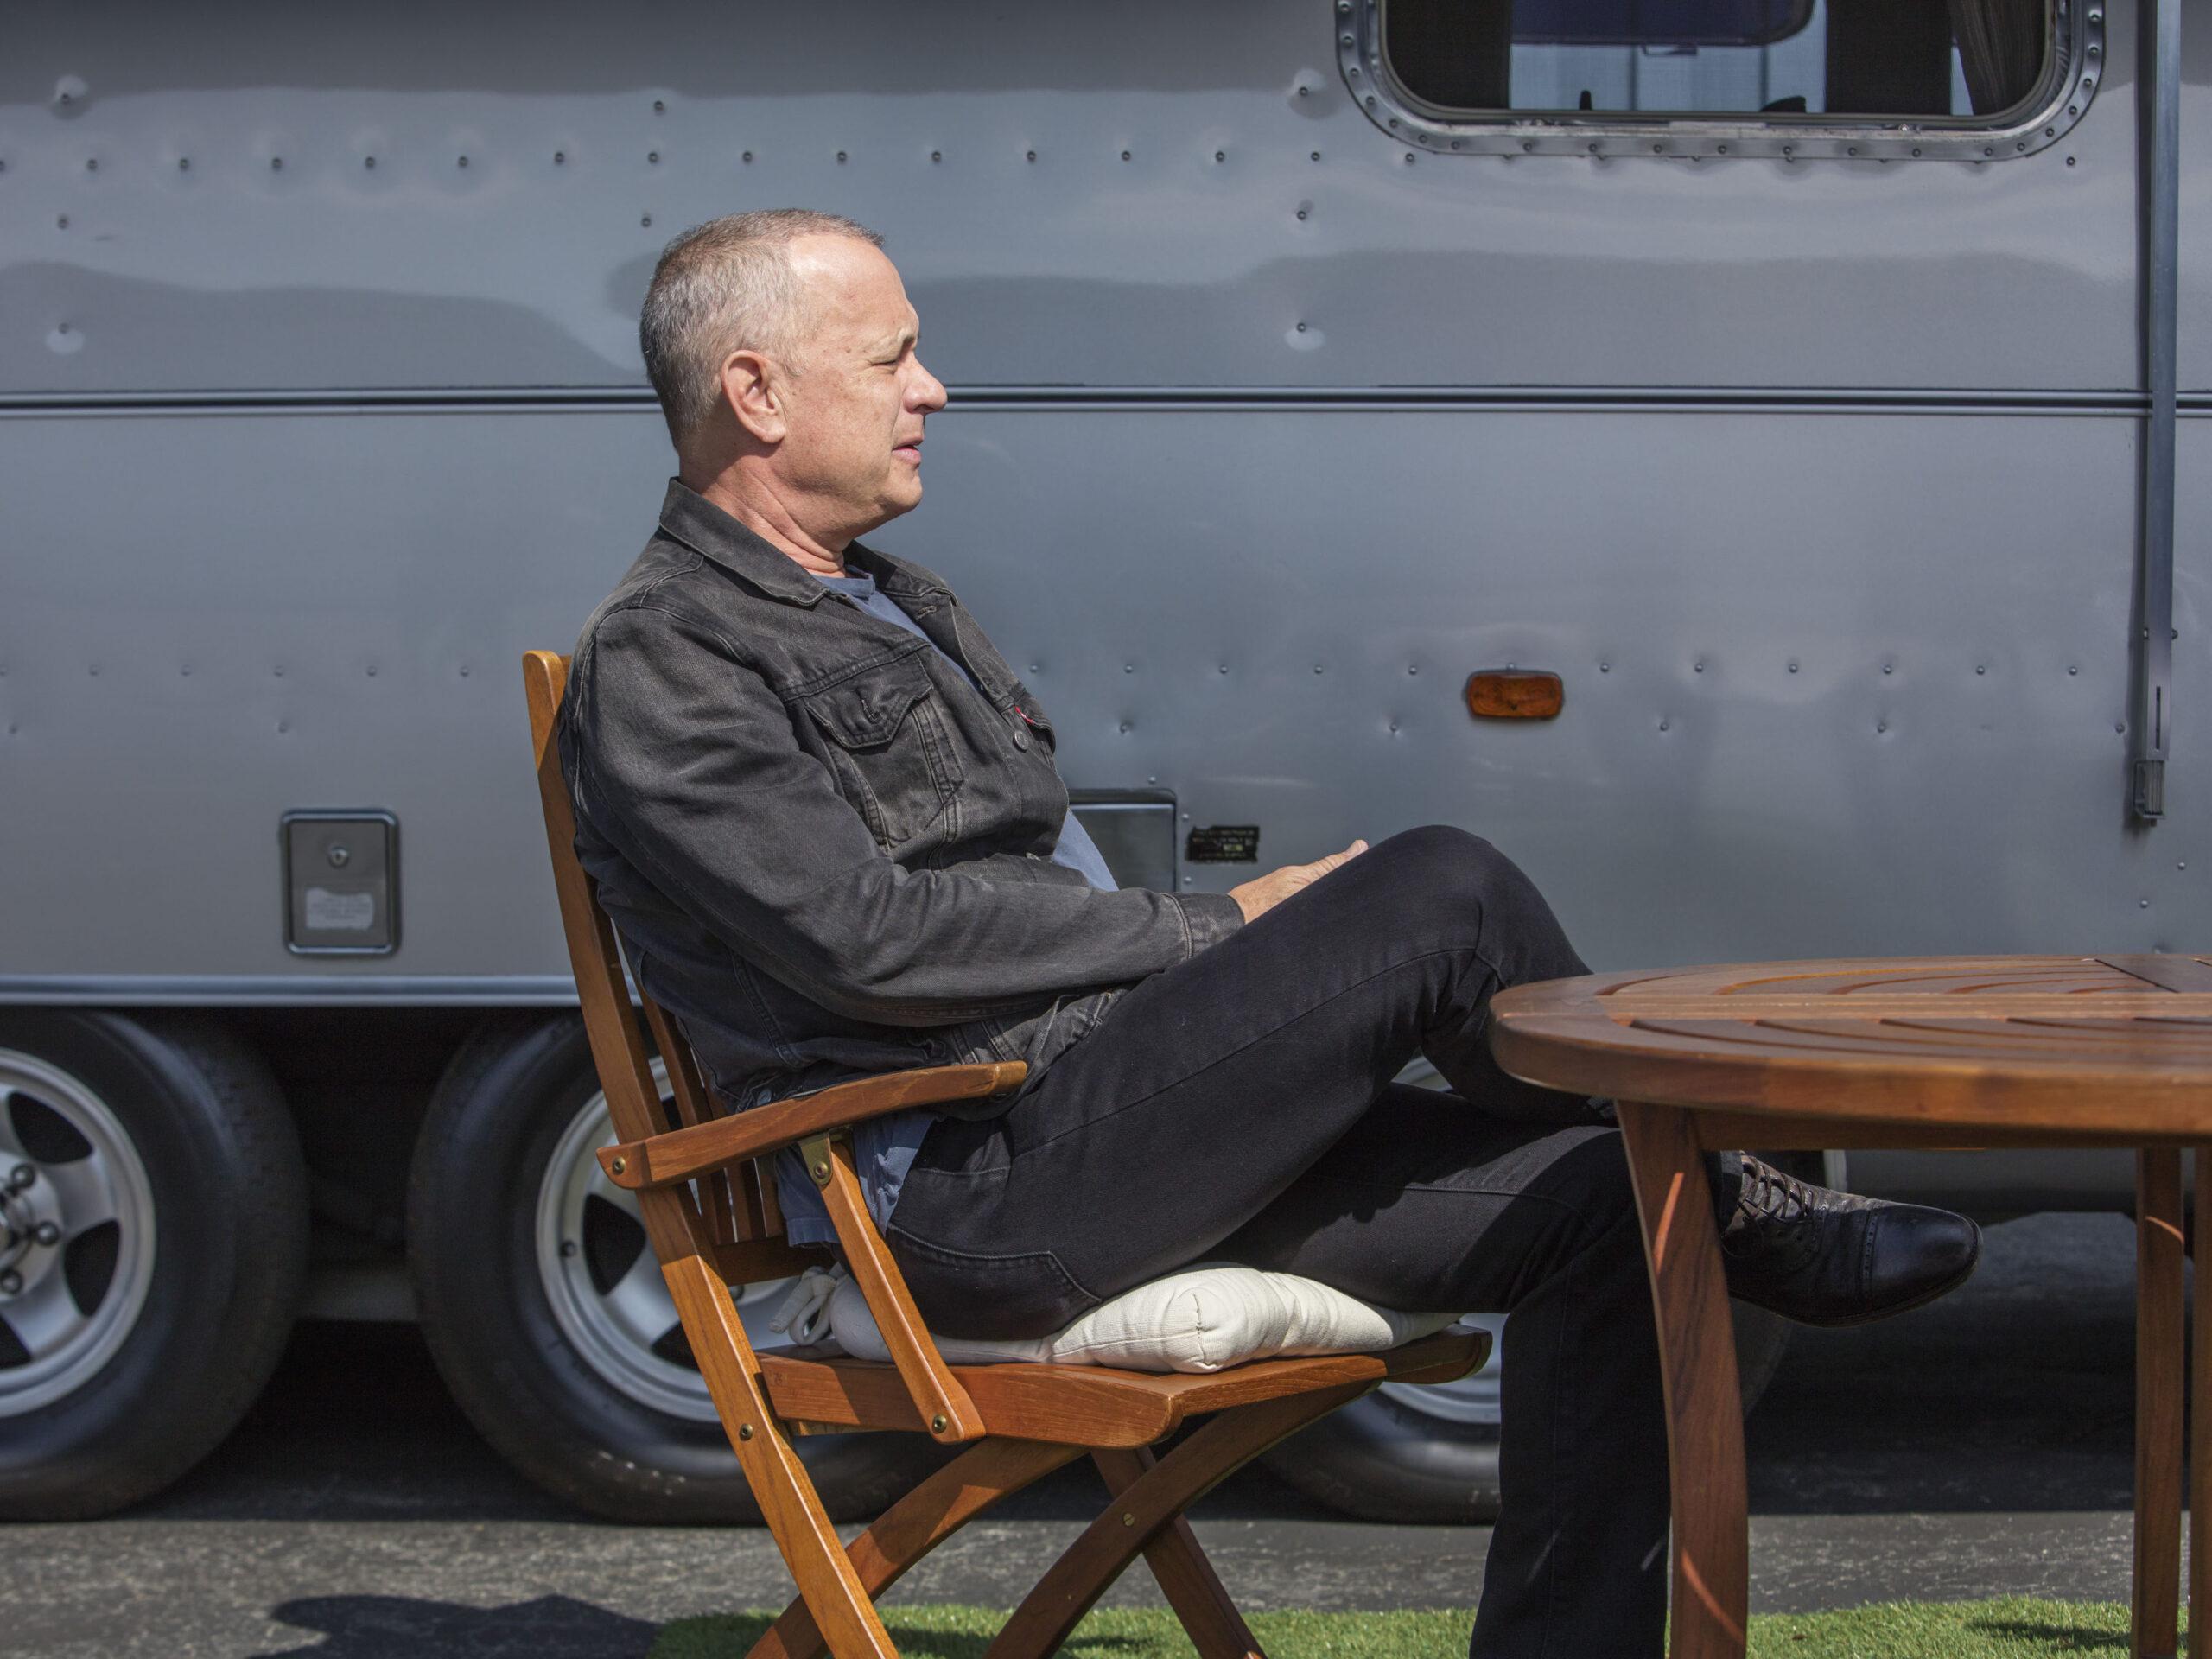 Tom Hanks selling home away from home Airstream trailer after almost 30 years on iconic film sets